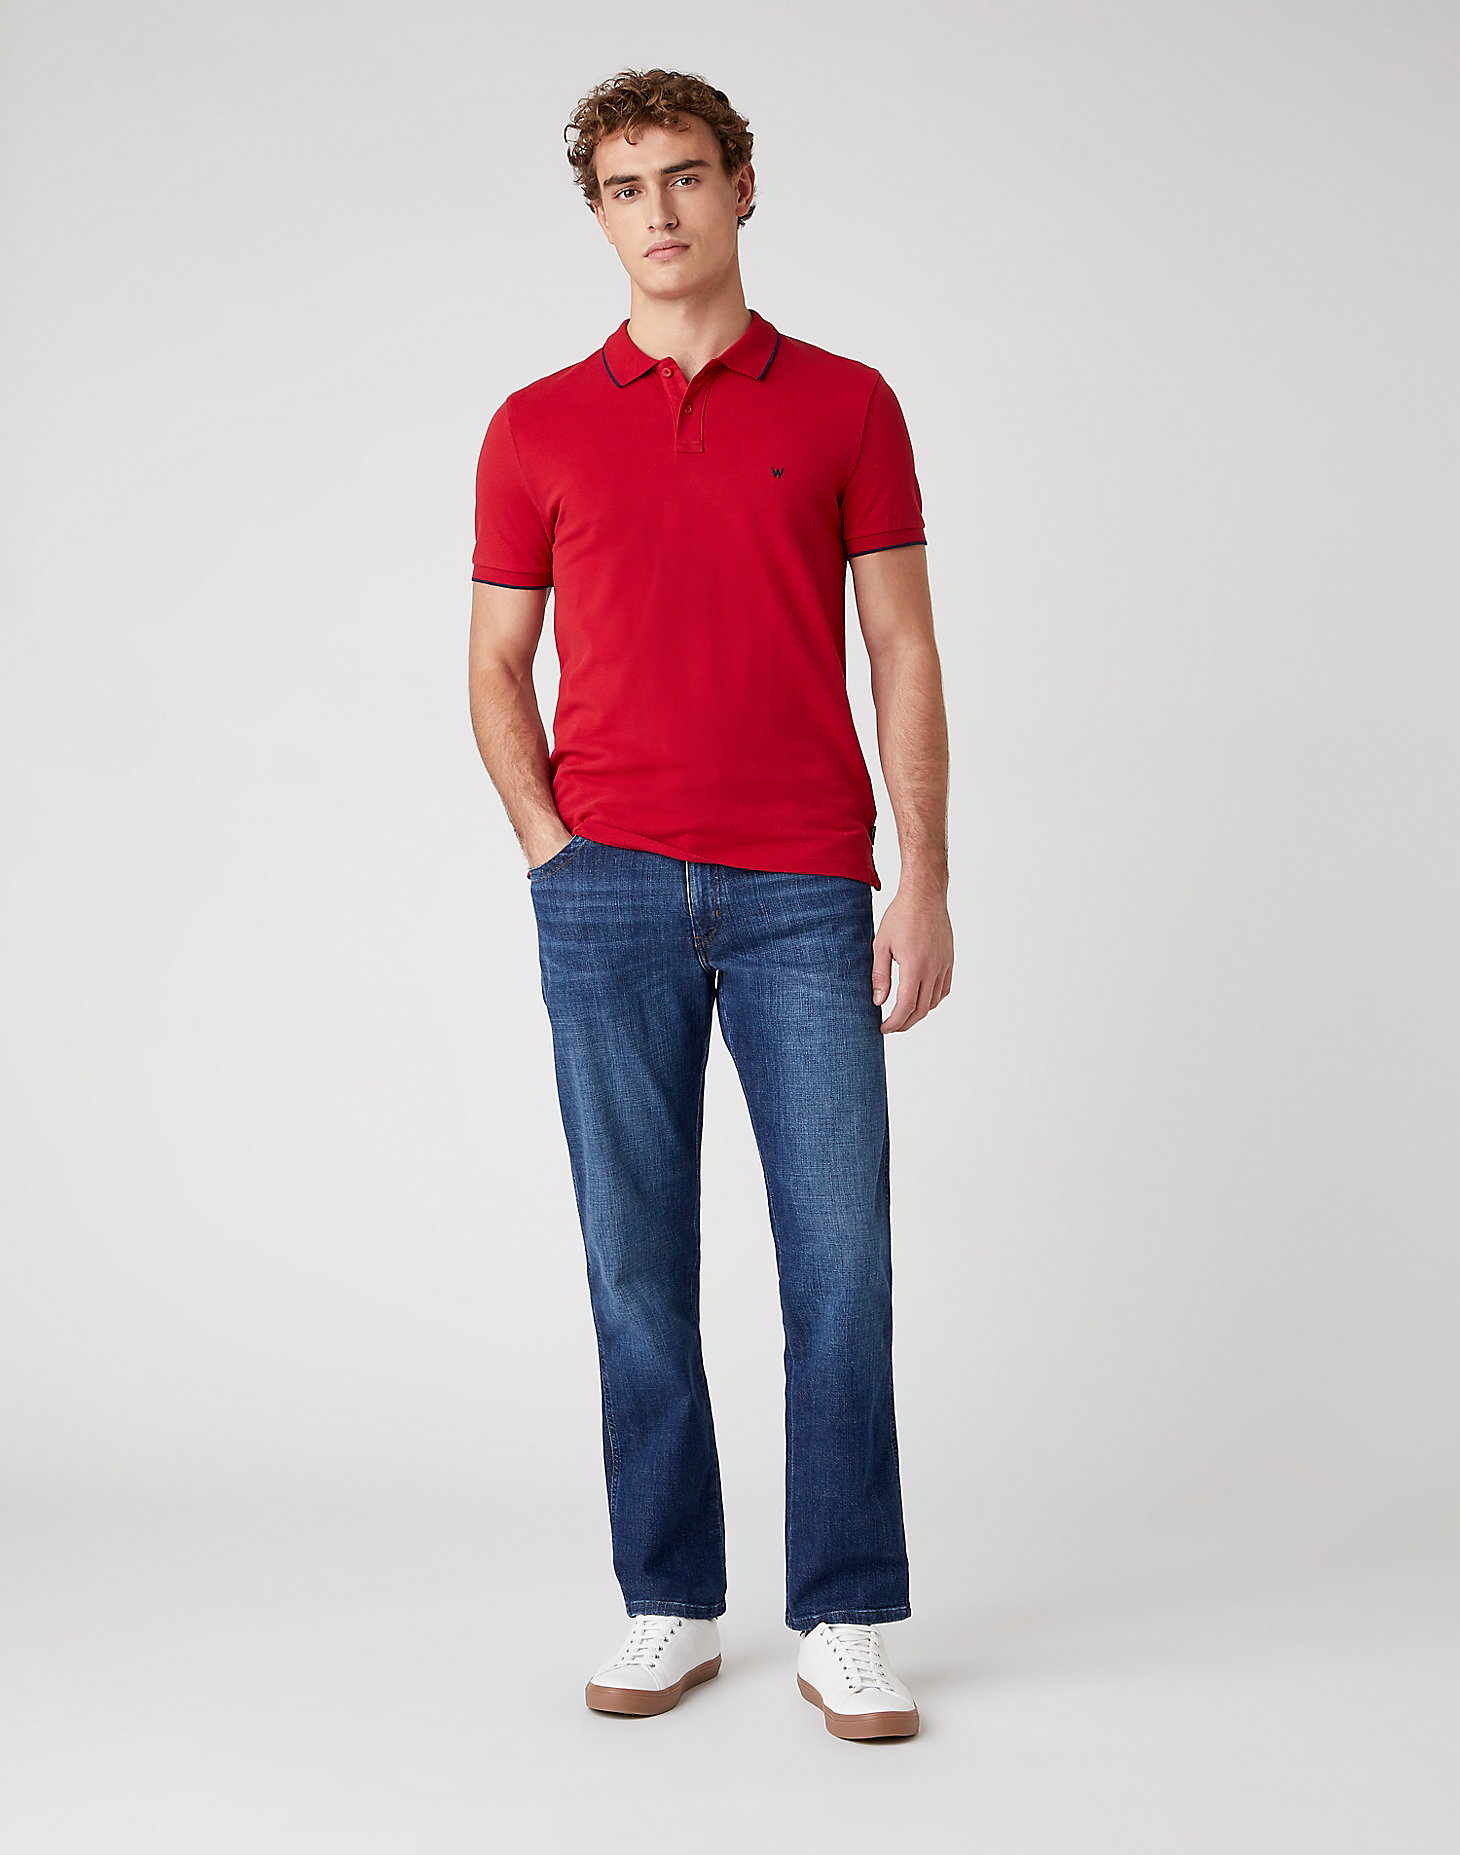 Short Sleeve Pique Polo in Red alternative view 4